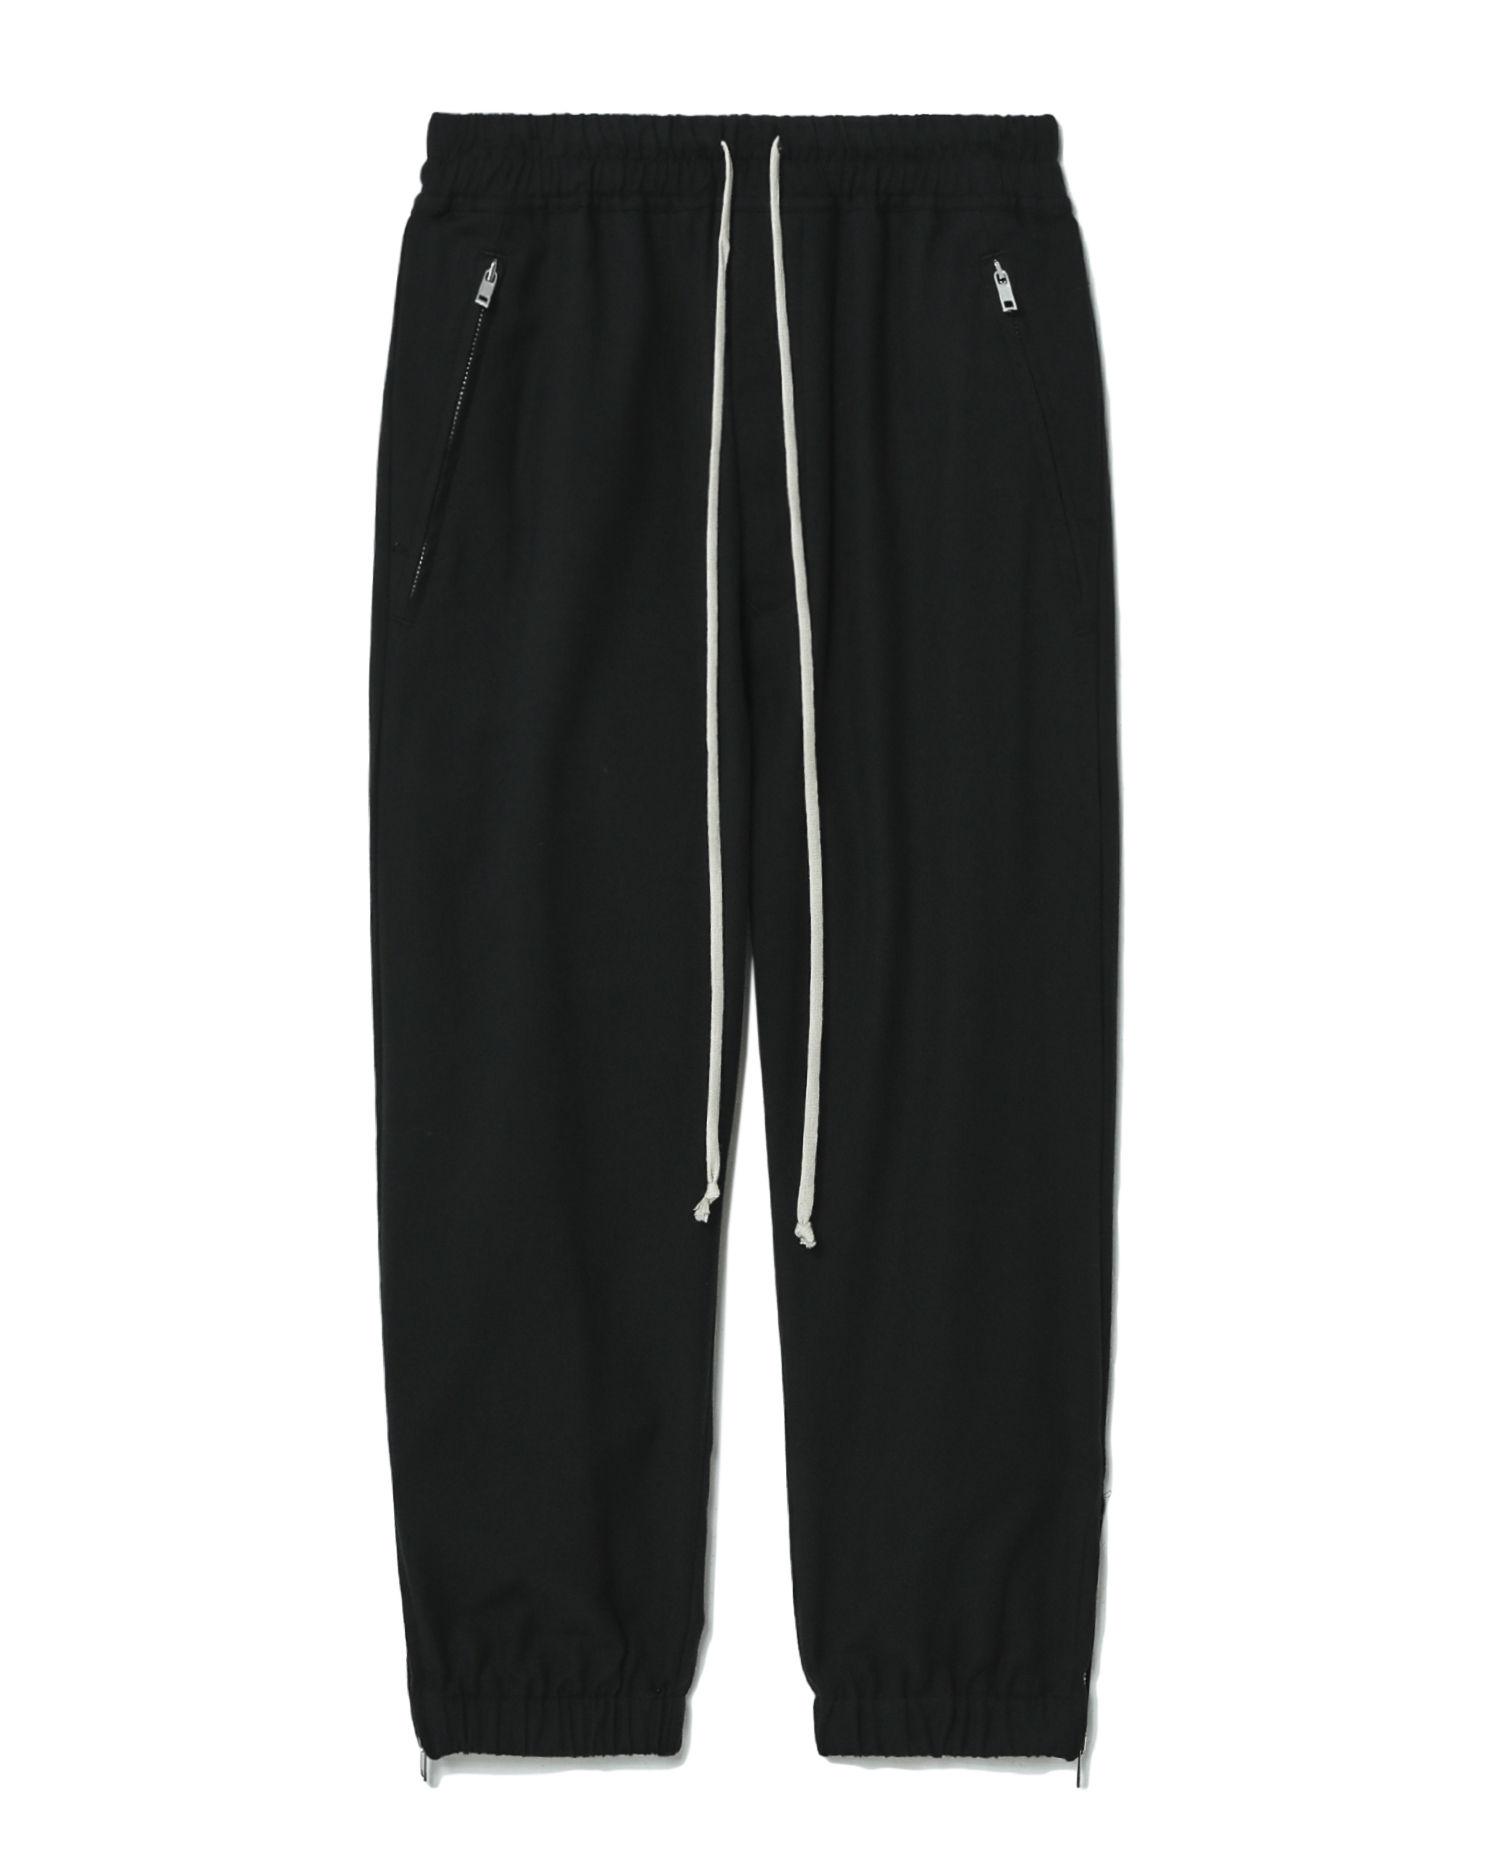 Cropped track pants by RICK OWENS